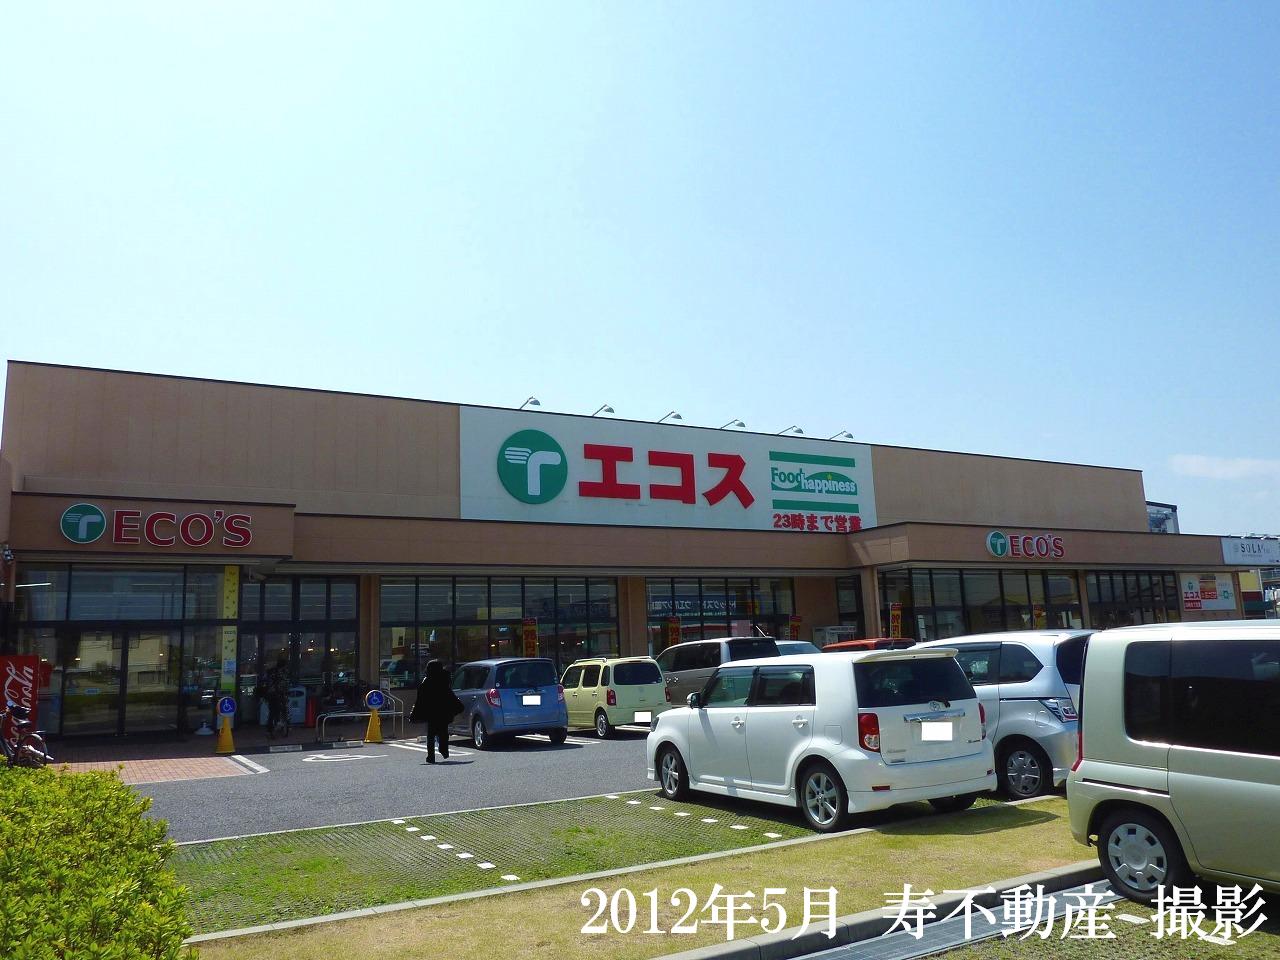 Supermarket. Ecos Food Happiness Kitamoto SC store up to (super) 799m